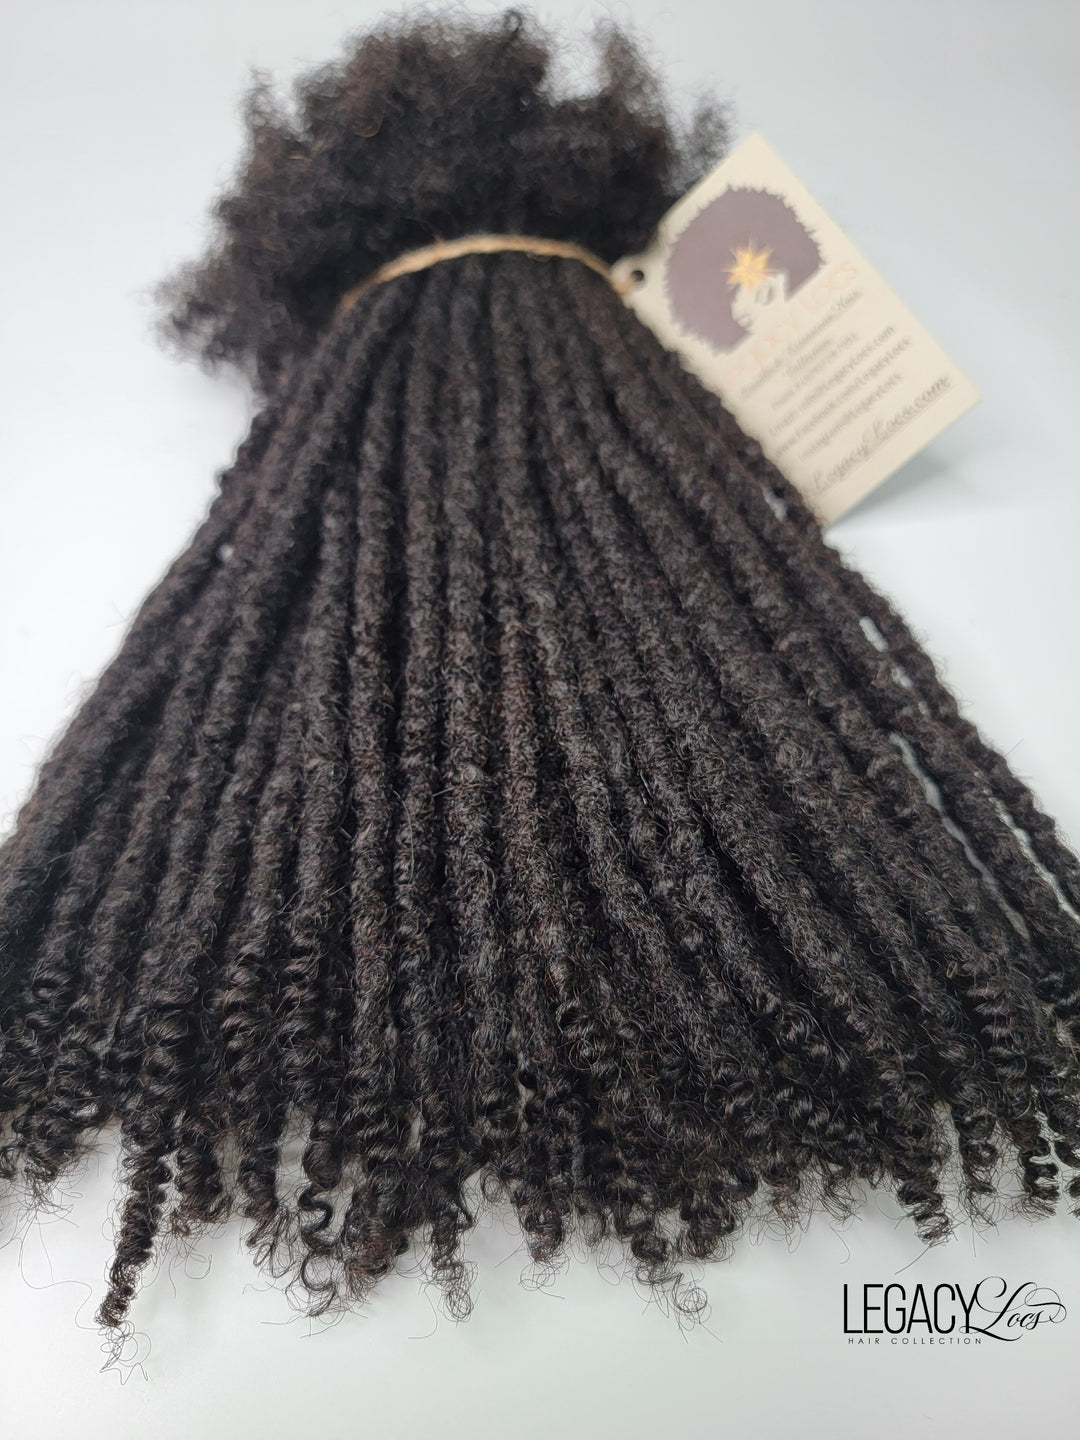 *Textured Coiled Tip* Large Width Loc Extension 10 Locs Per Bundle (PRE-ORDER)